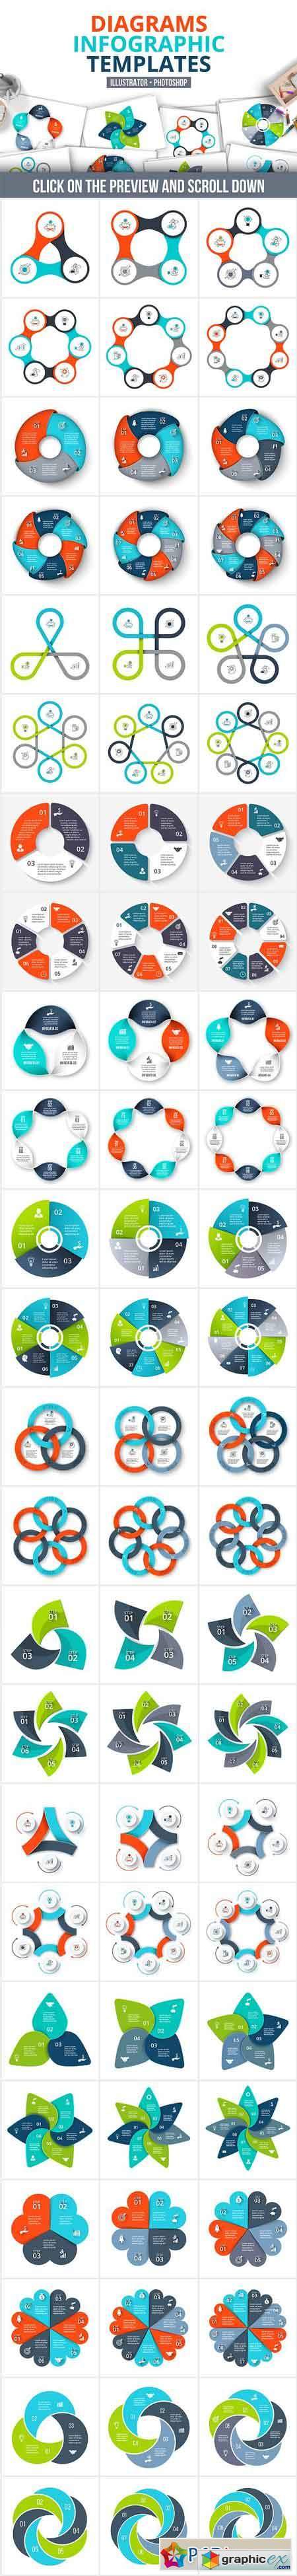 Diagrams infographic templates